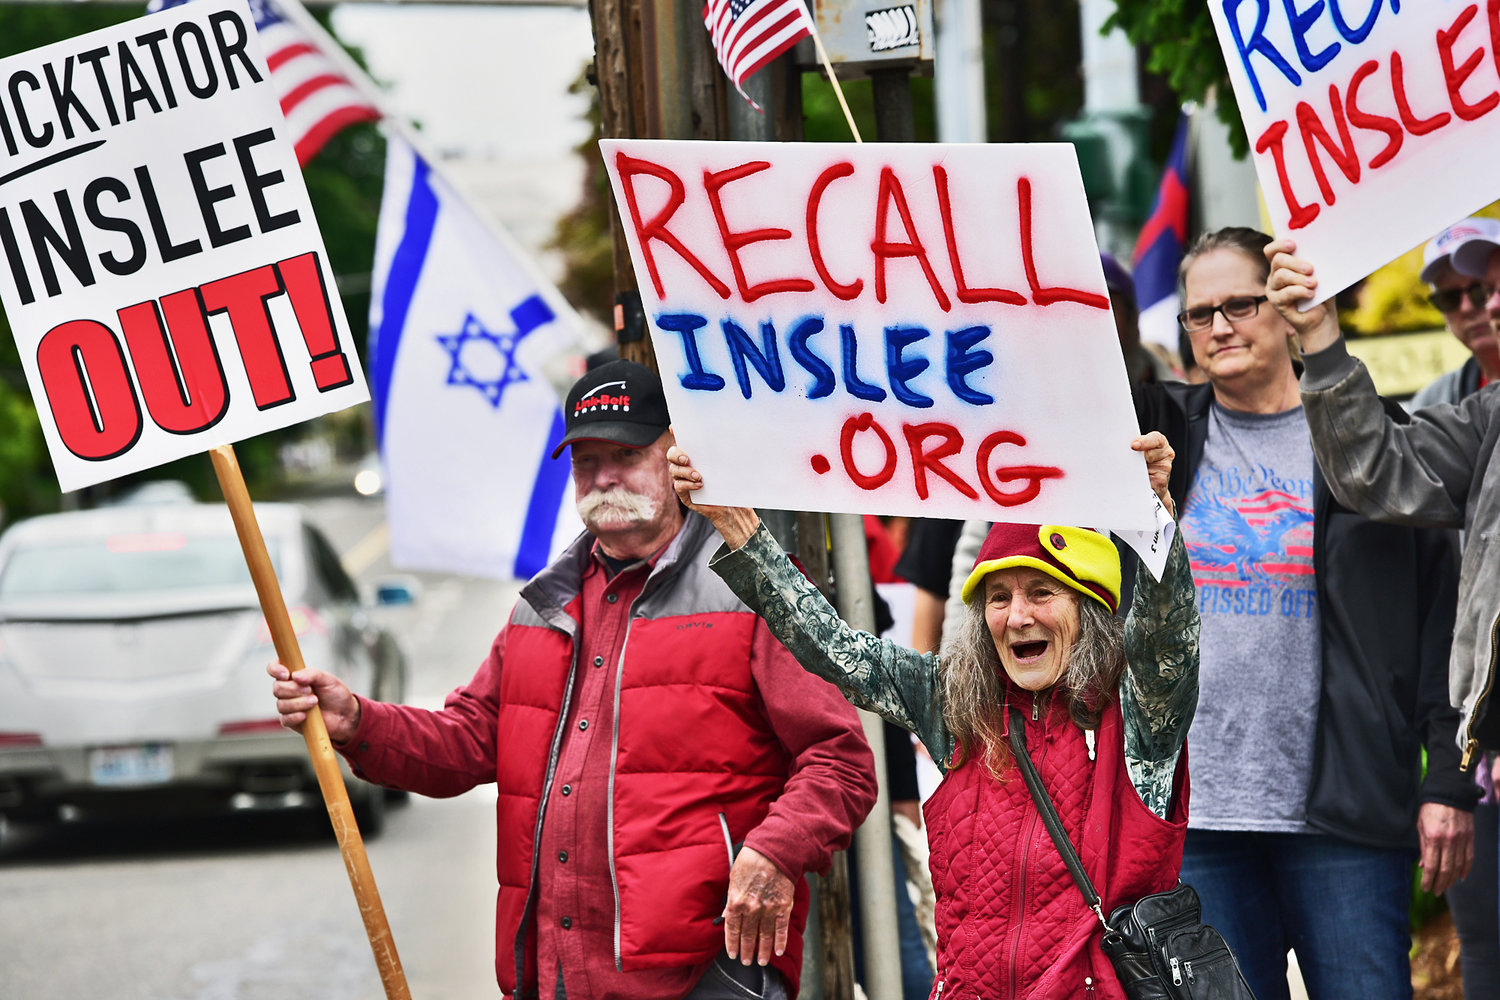 Yelm resident Bronwen Dickinson, middle right with red vest, shouts with glee at honking cars on Union Avenue during a gathering in Olympia on Monday, May 17, at the Secretary of State’s Office to file a petition for recall against Washington Gov. Jay Inslee. Dickinson was among about 100 people to attend the rally.